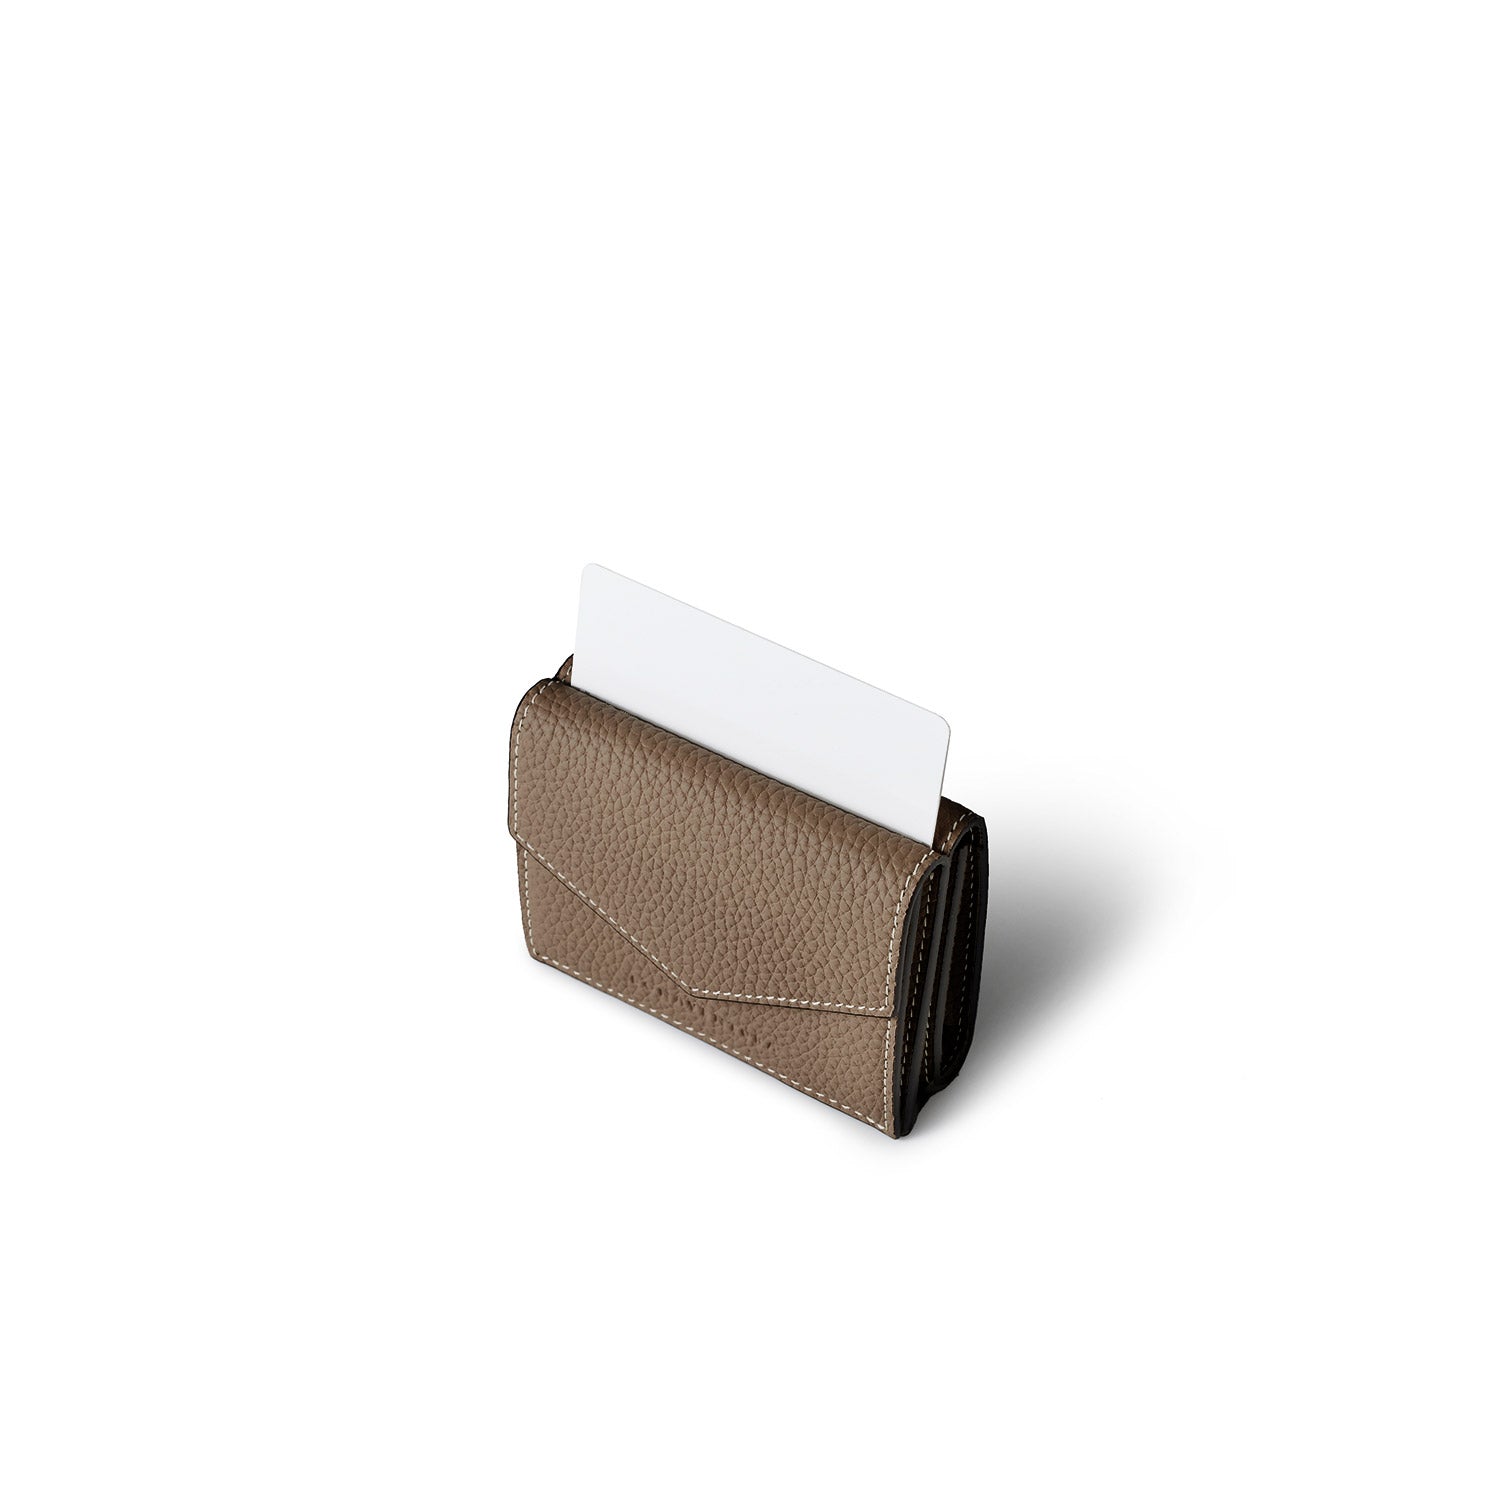 All-shrunk leather small wallet